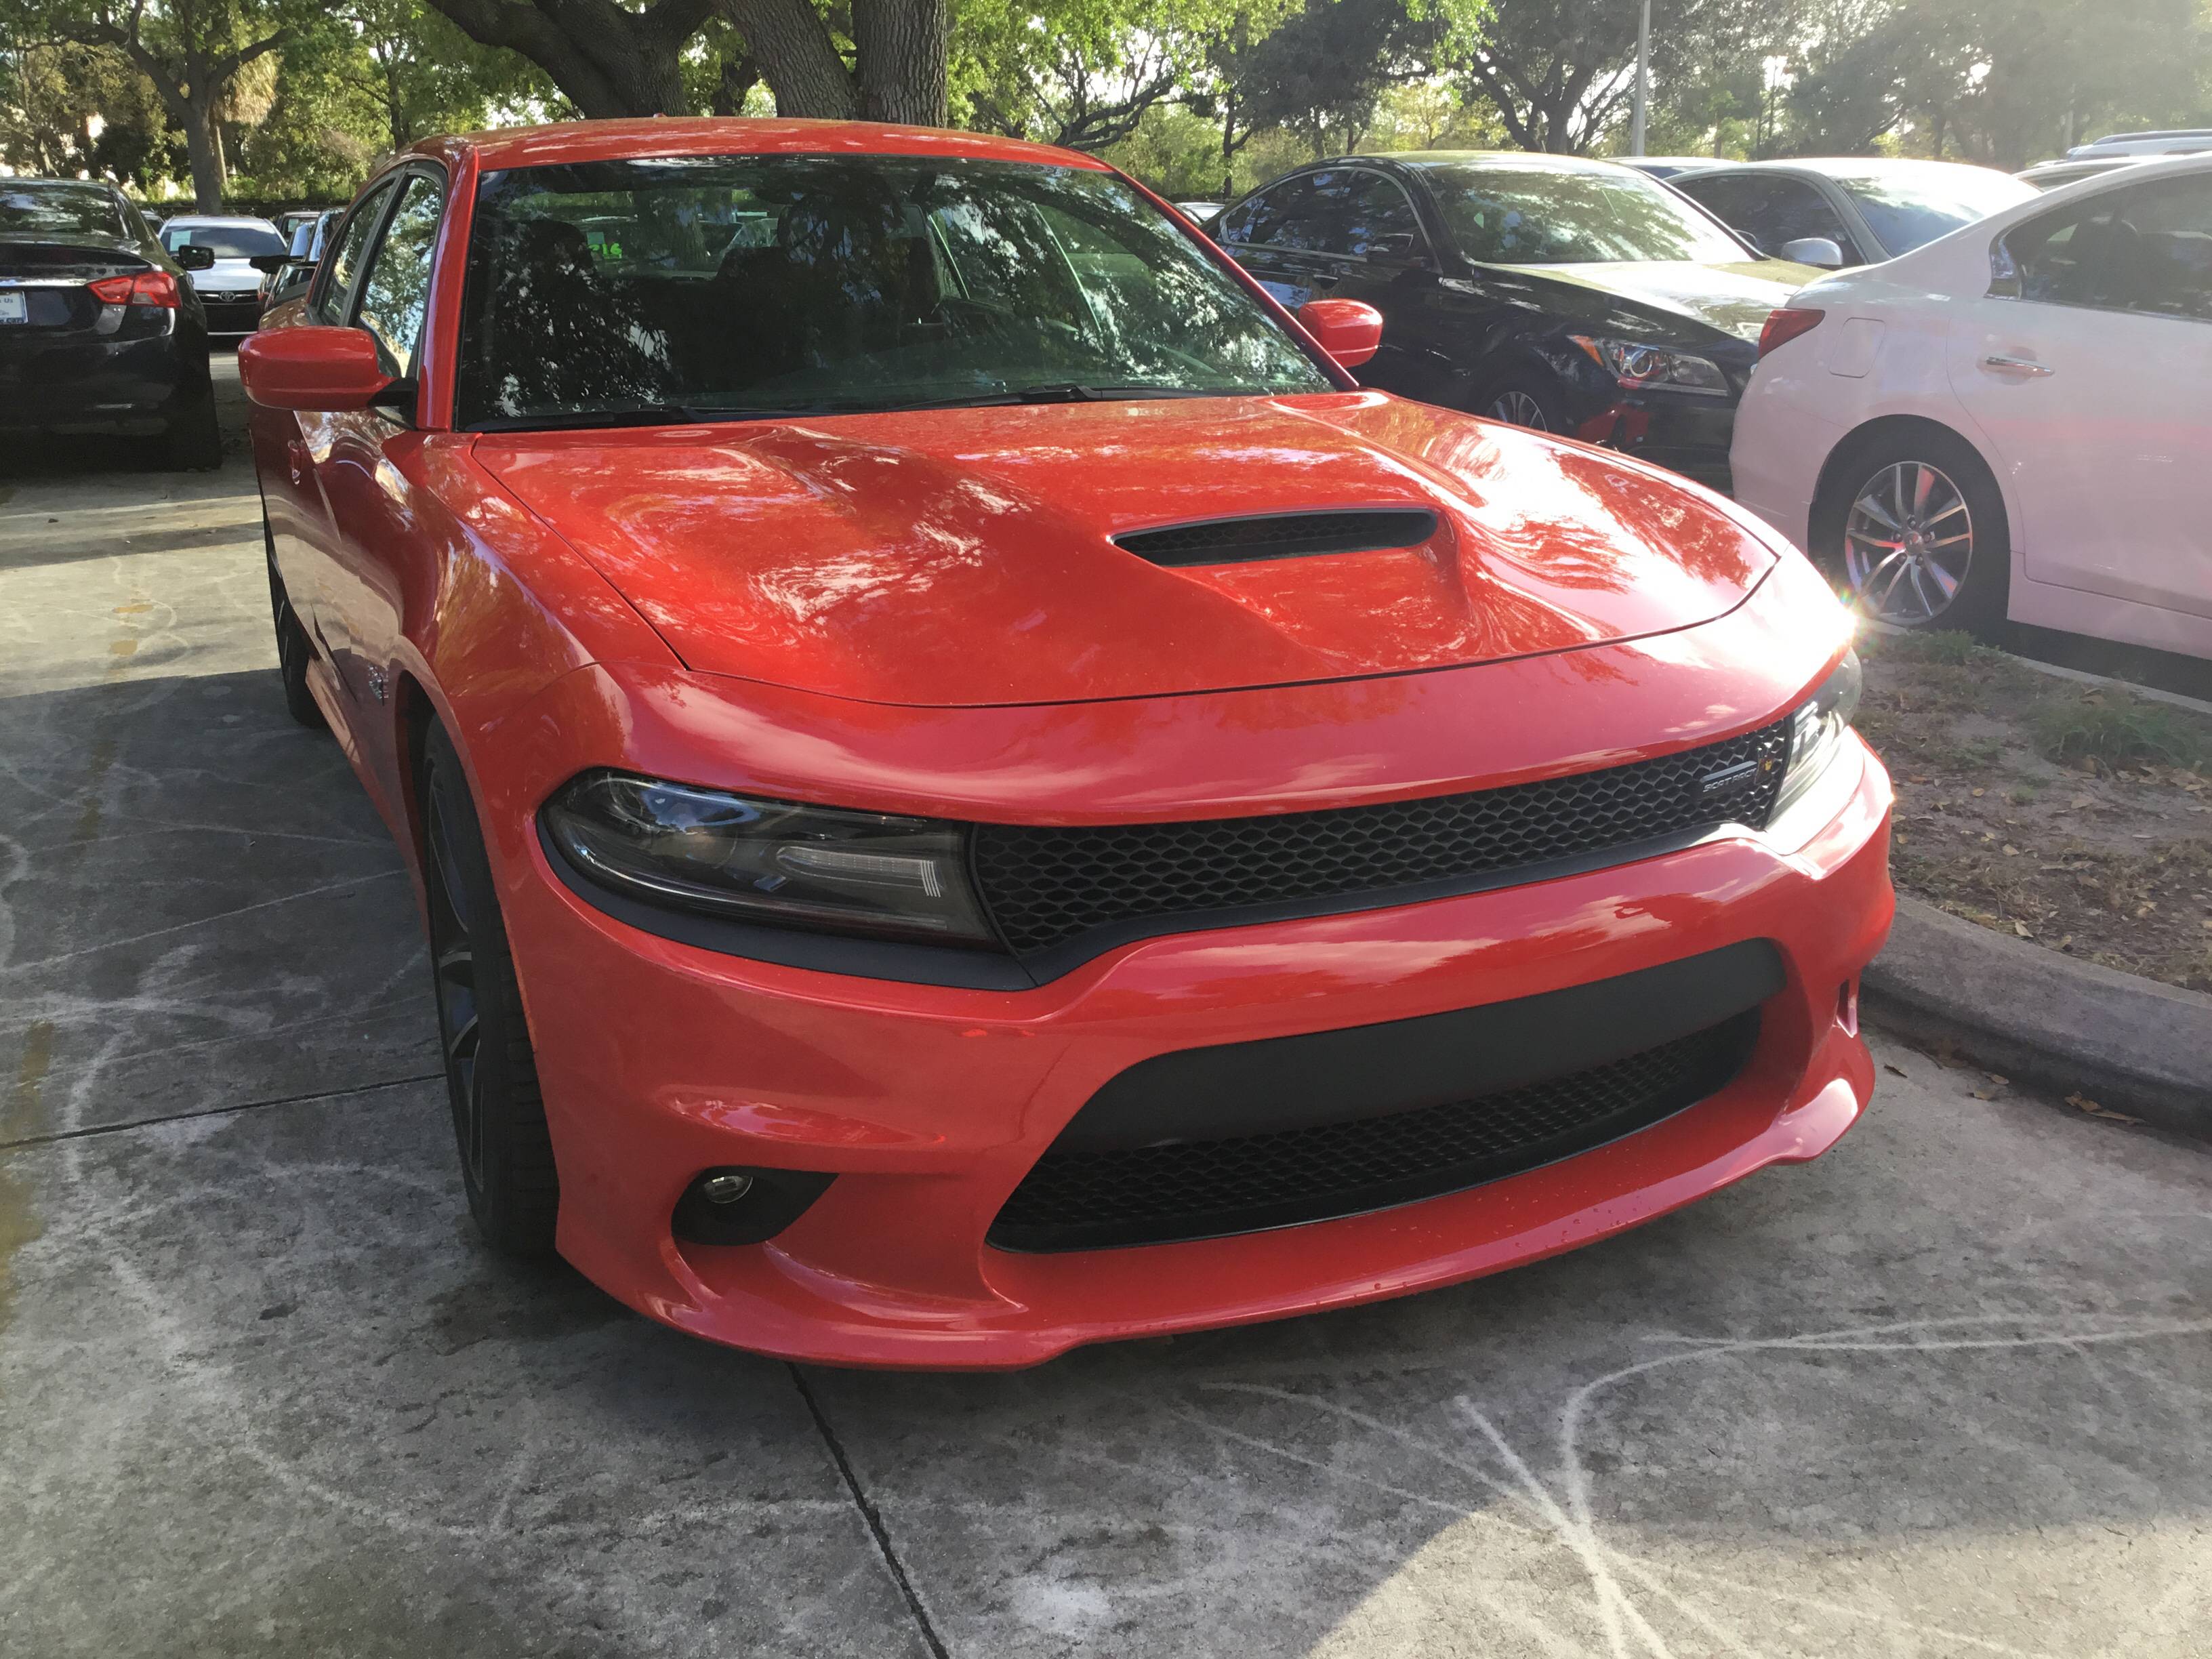 Florida Fine Cars - Used DODGE CHARGER 2017 WEST PALM R/t Scat Pac 392